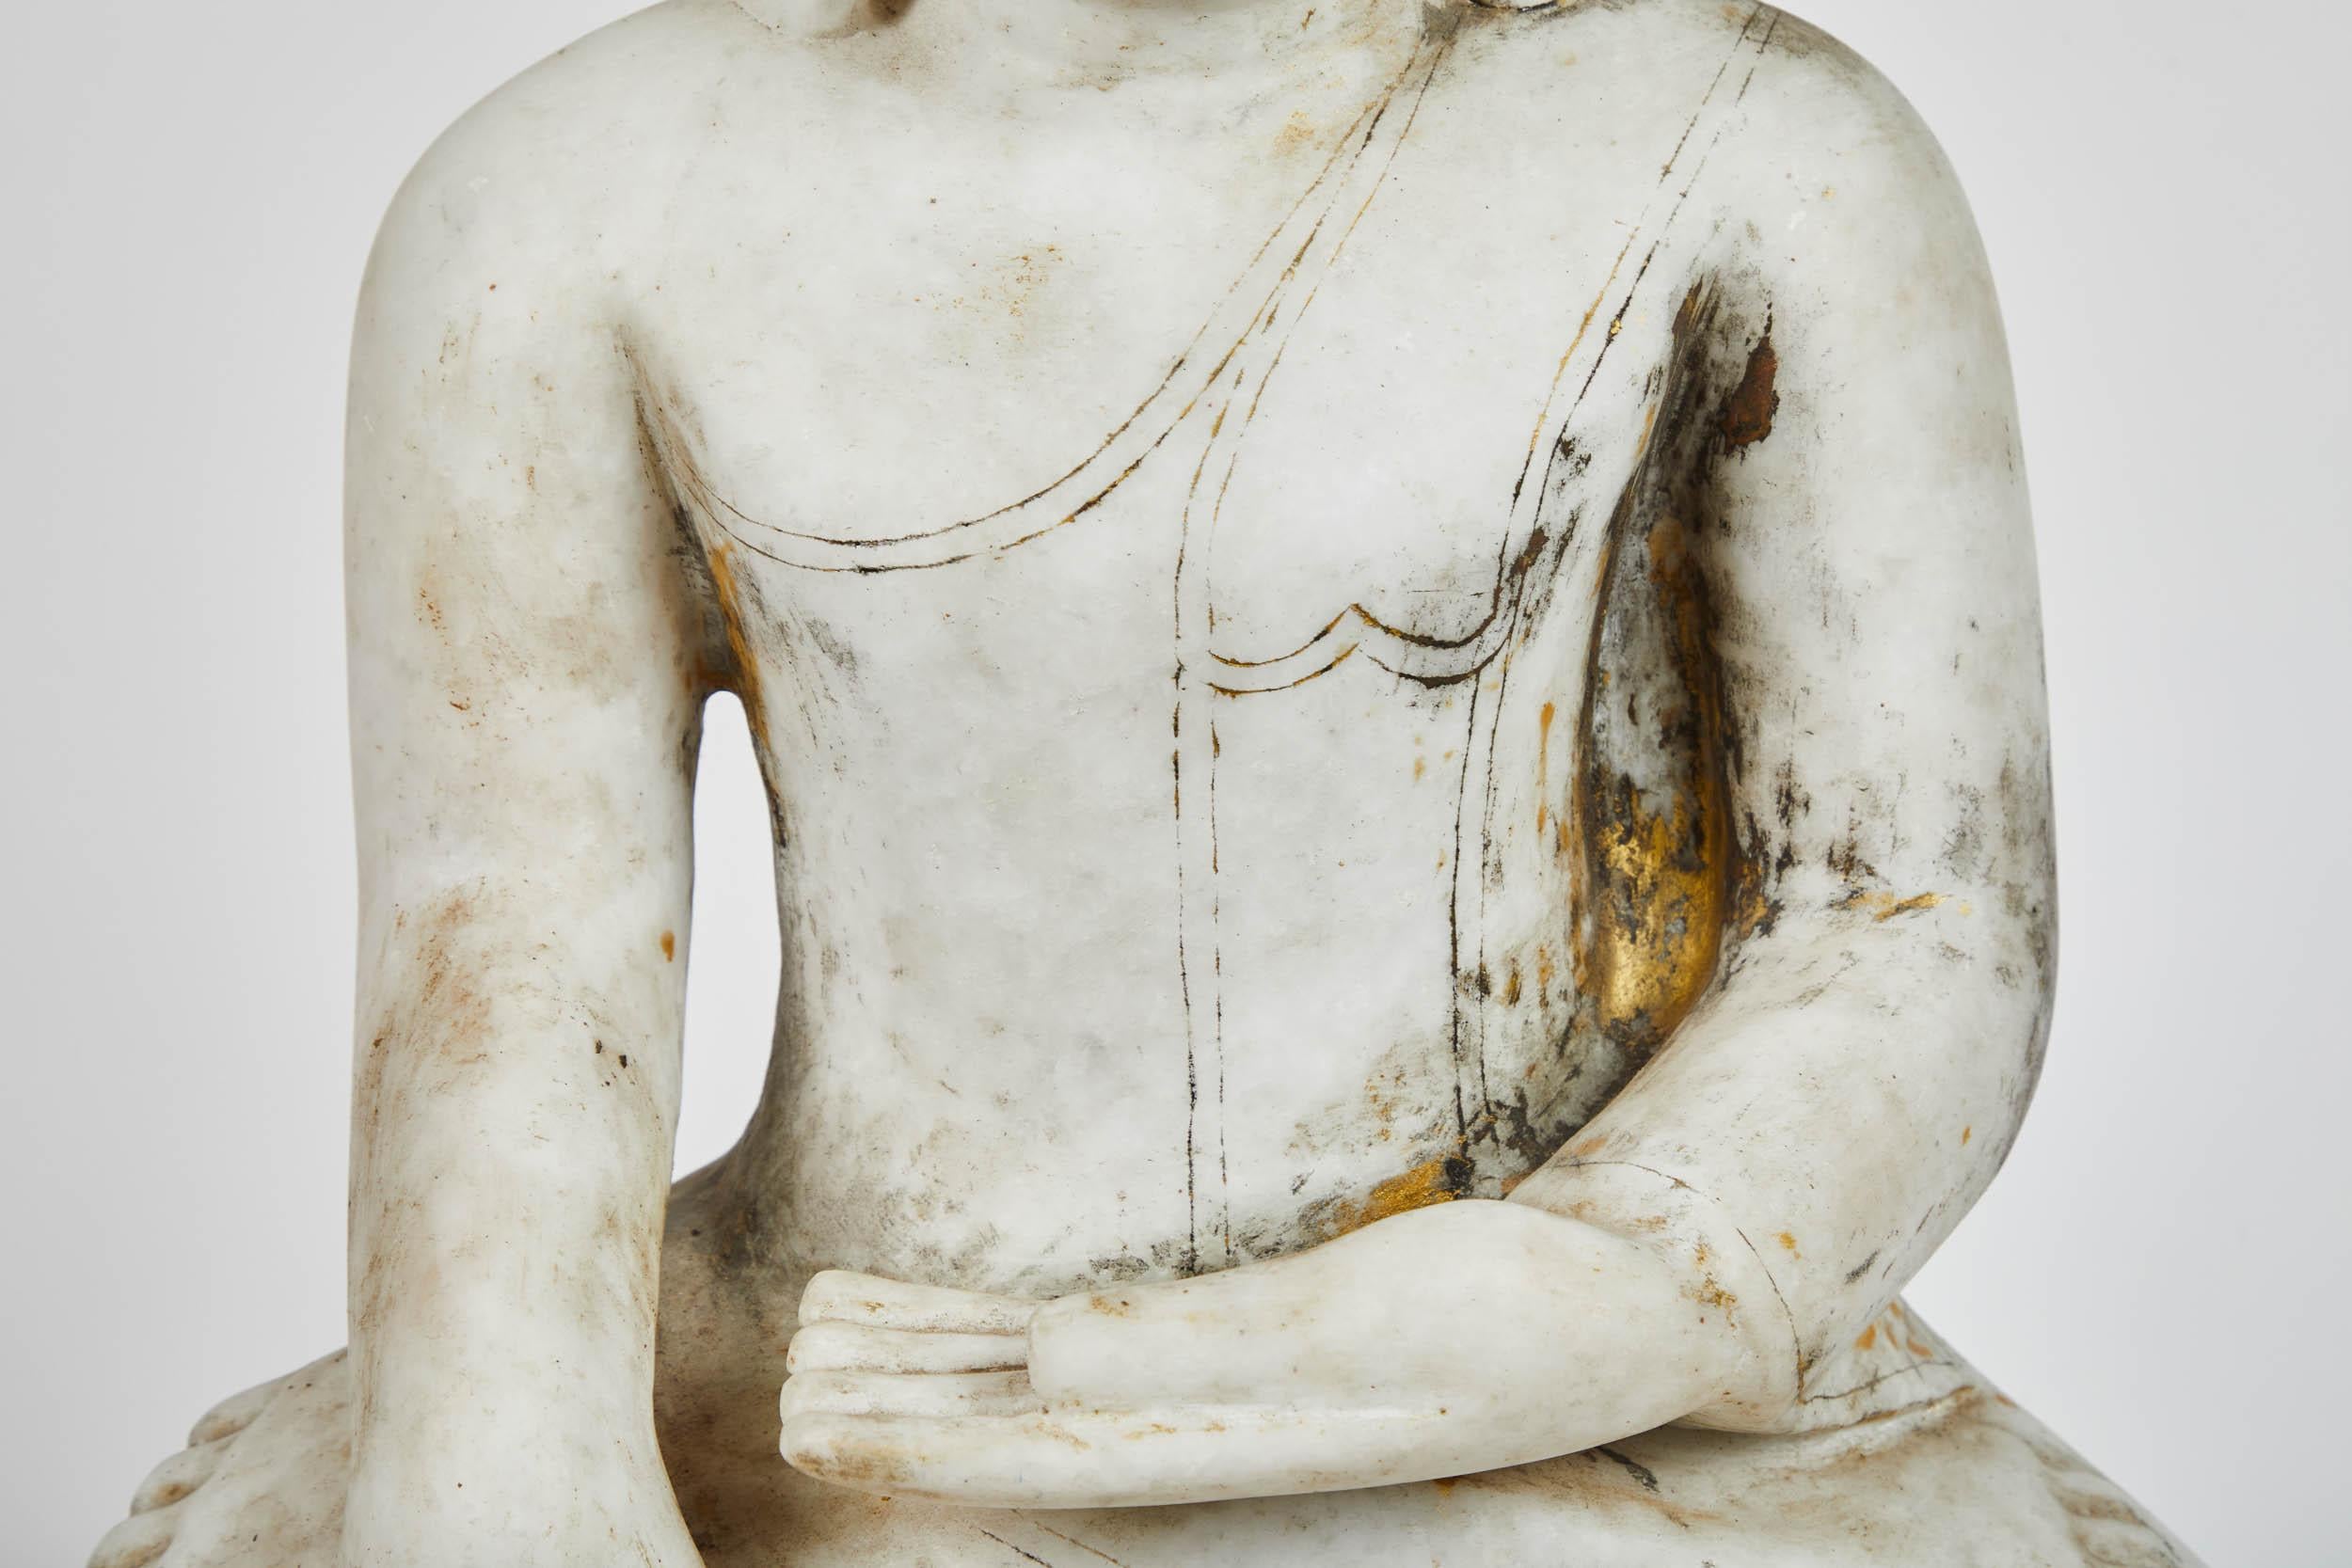 18th century Ava style Buddha from Central Myanmar in white alabaster. Carved detailing around base, but otherwise simple form.